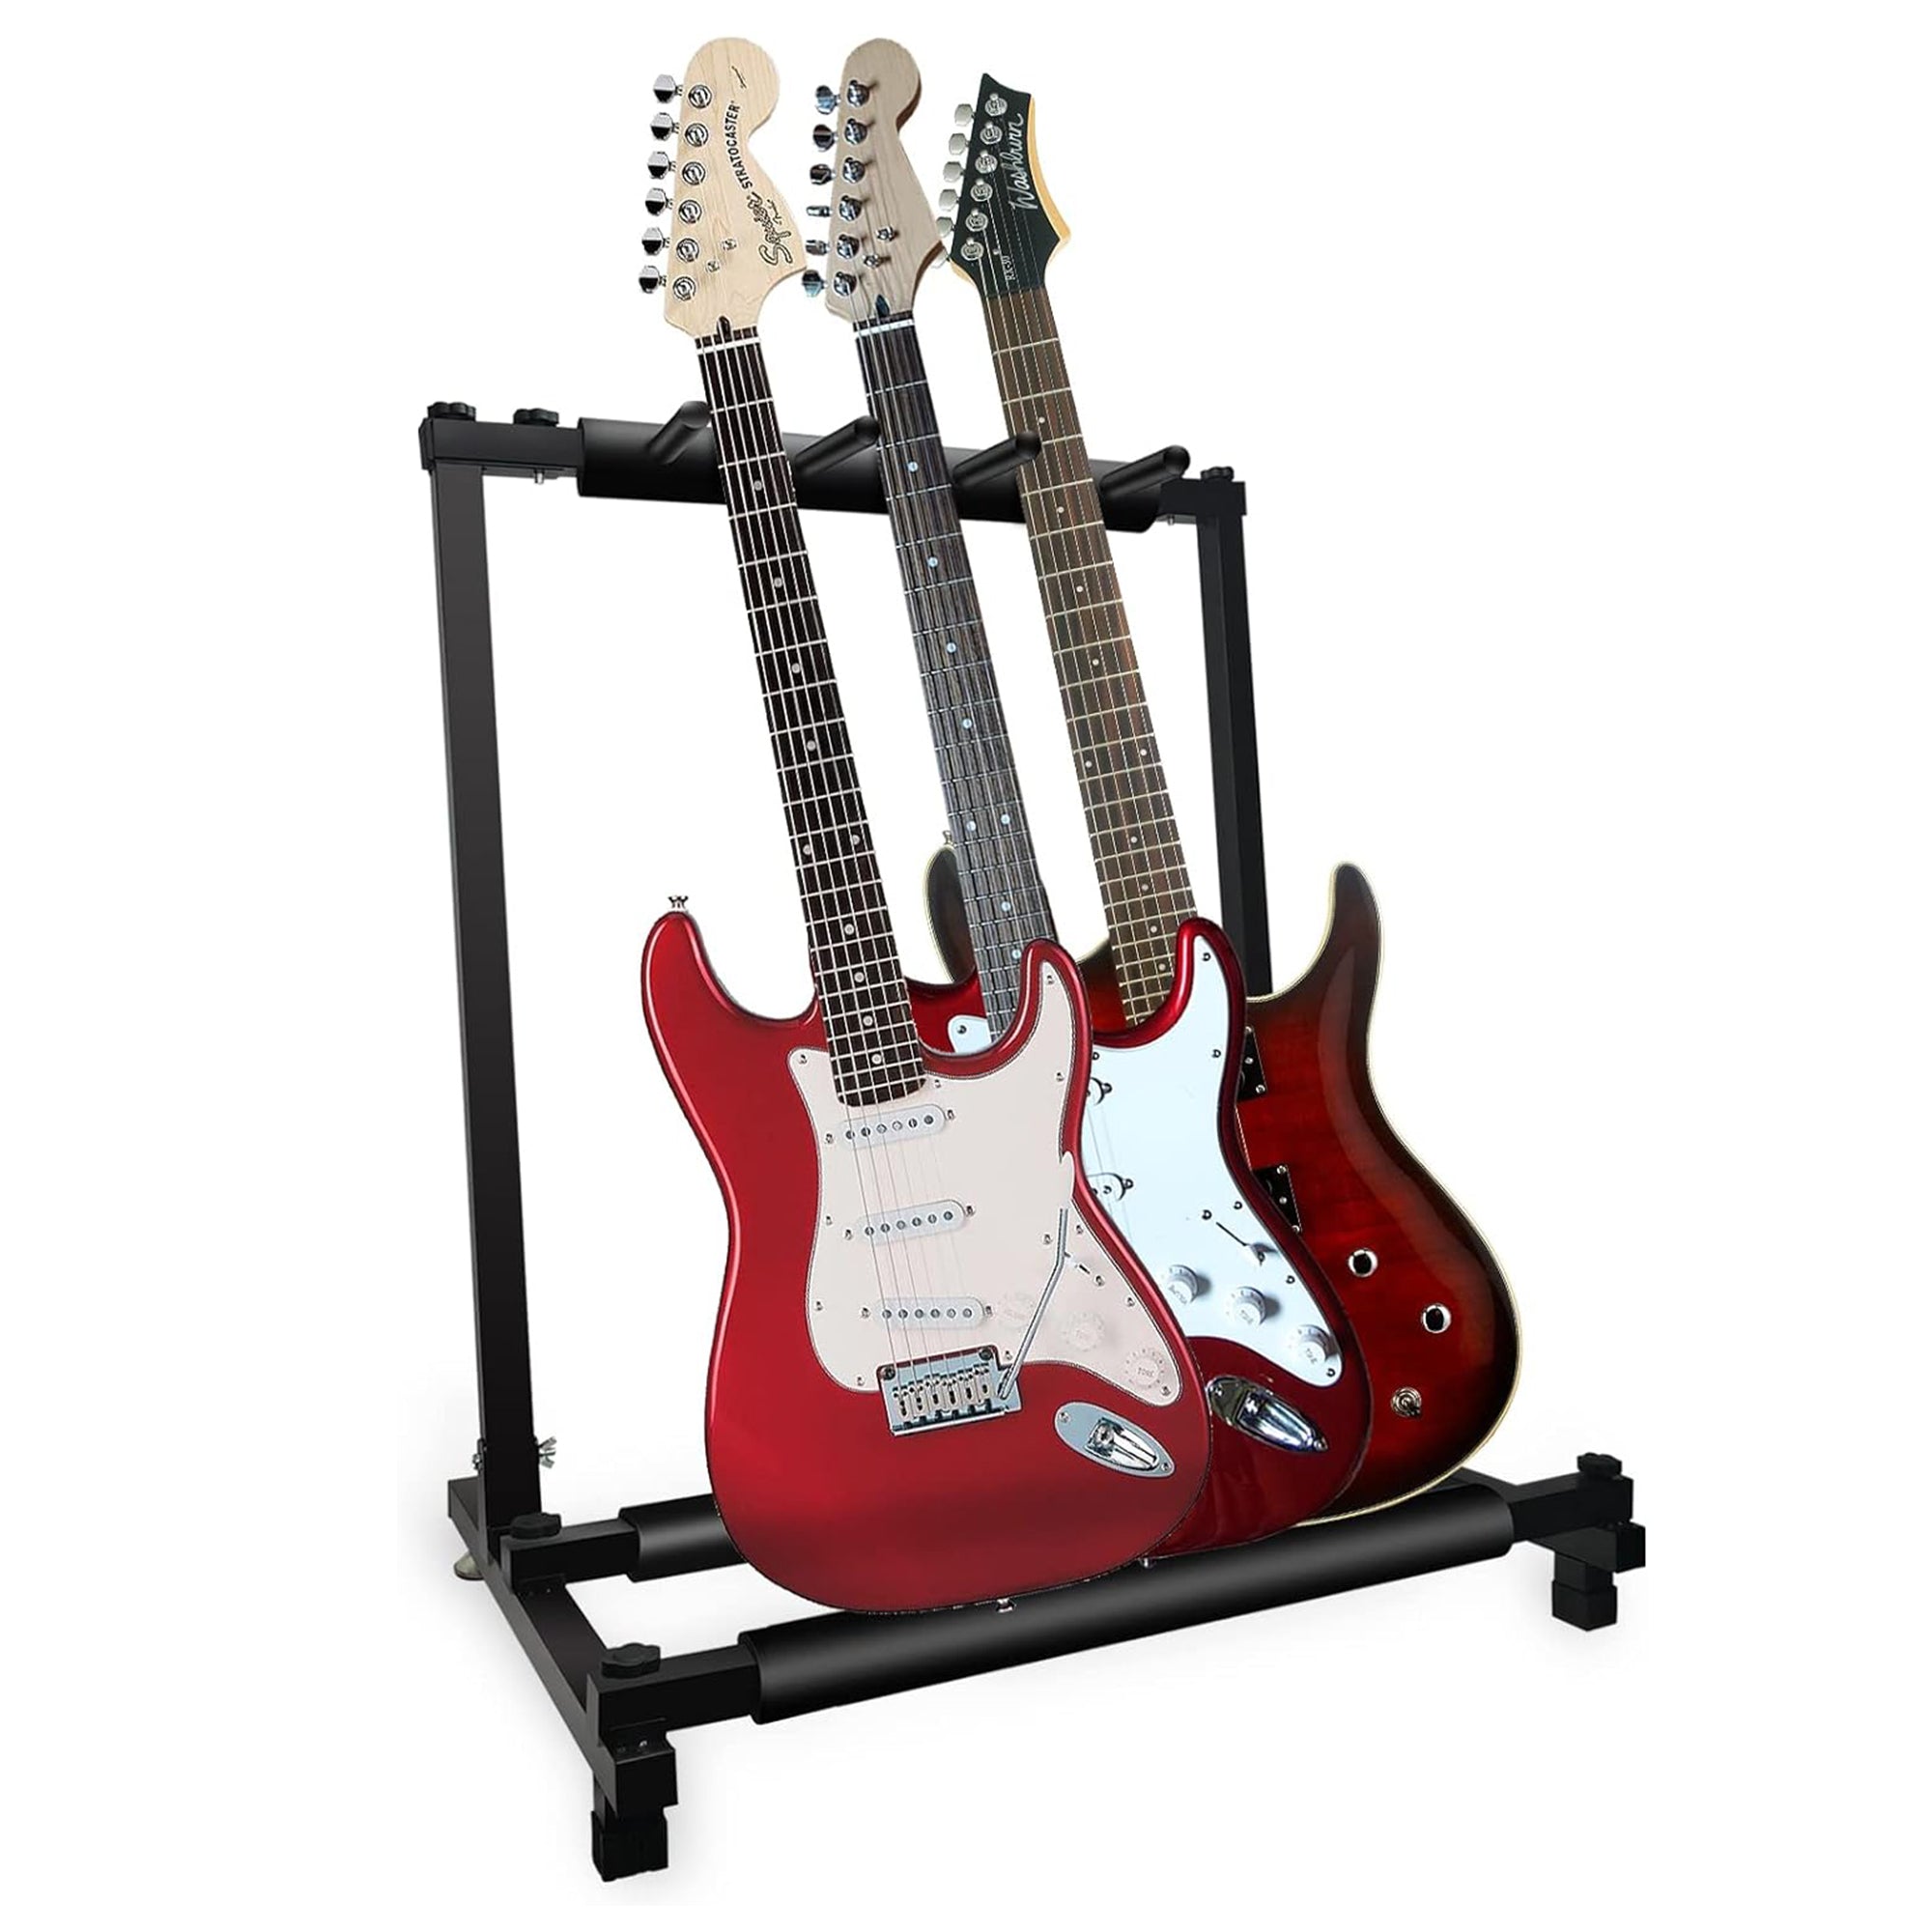 5 Core Guitar Stand Metal Guitar Floor Rack For Multiple Guitars 3 Guitar Stand For Instruments